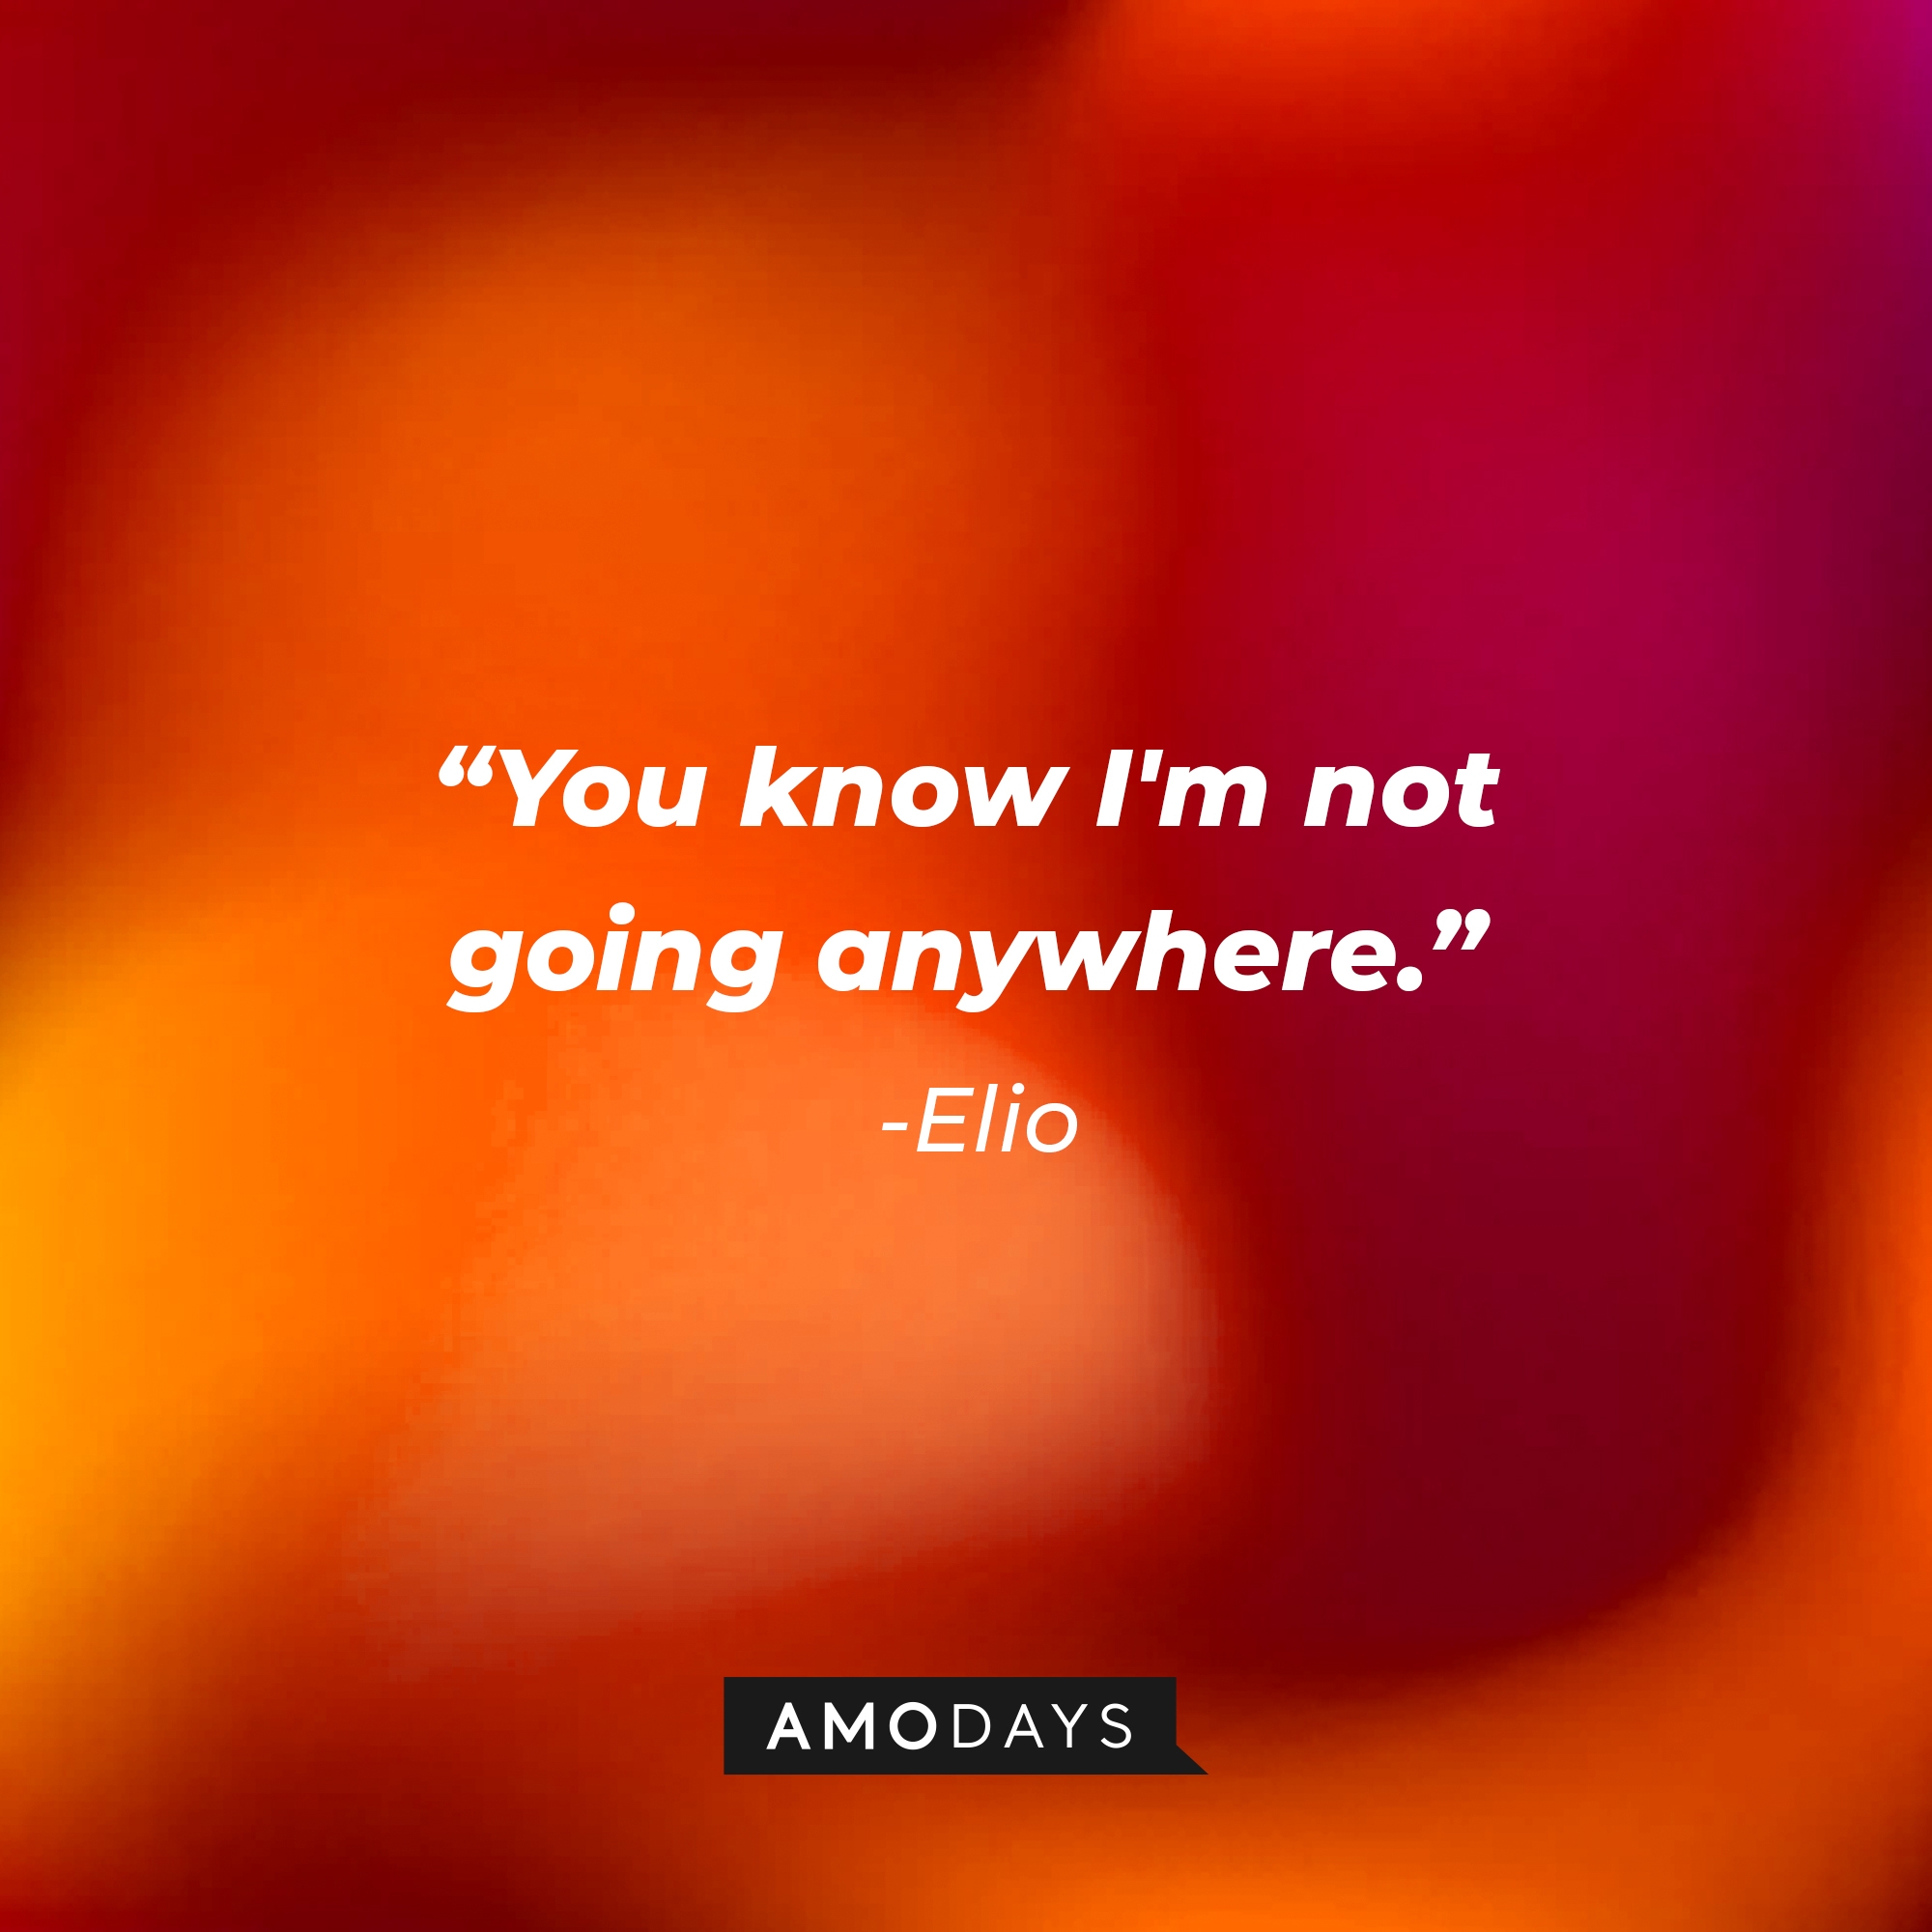 Elio's quote: "You know I'm not going anywhere." | Source: AmoDays